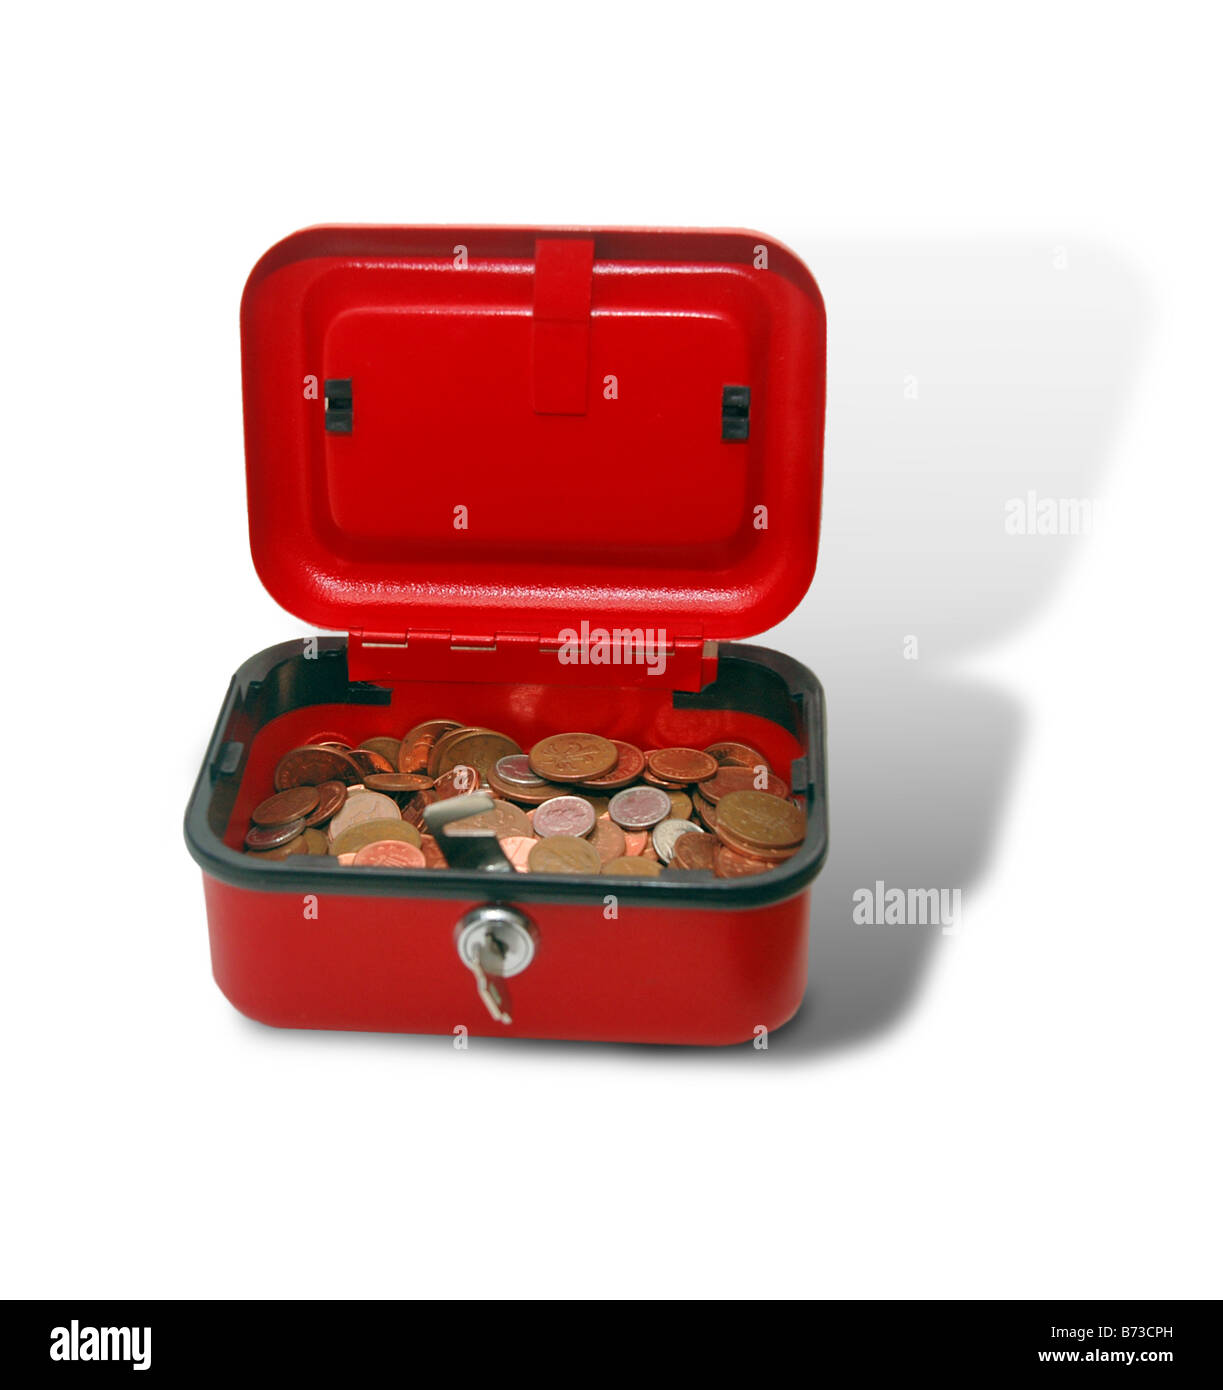 A money box with sterling coins. Stock Photo